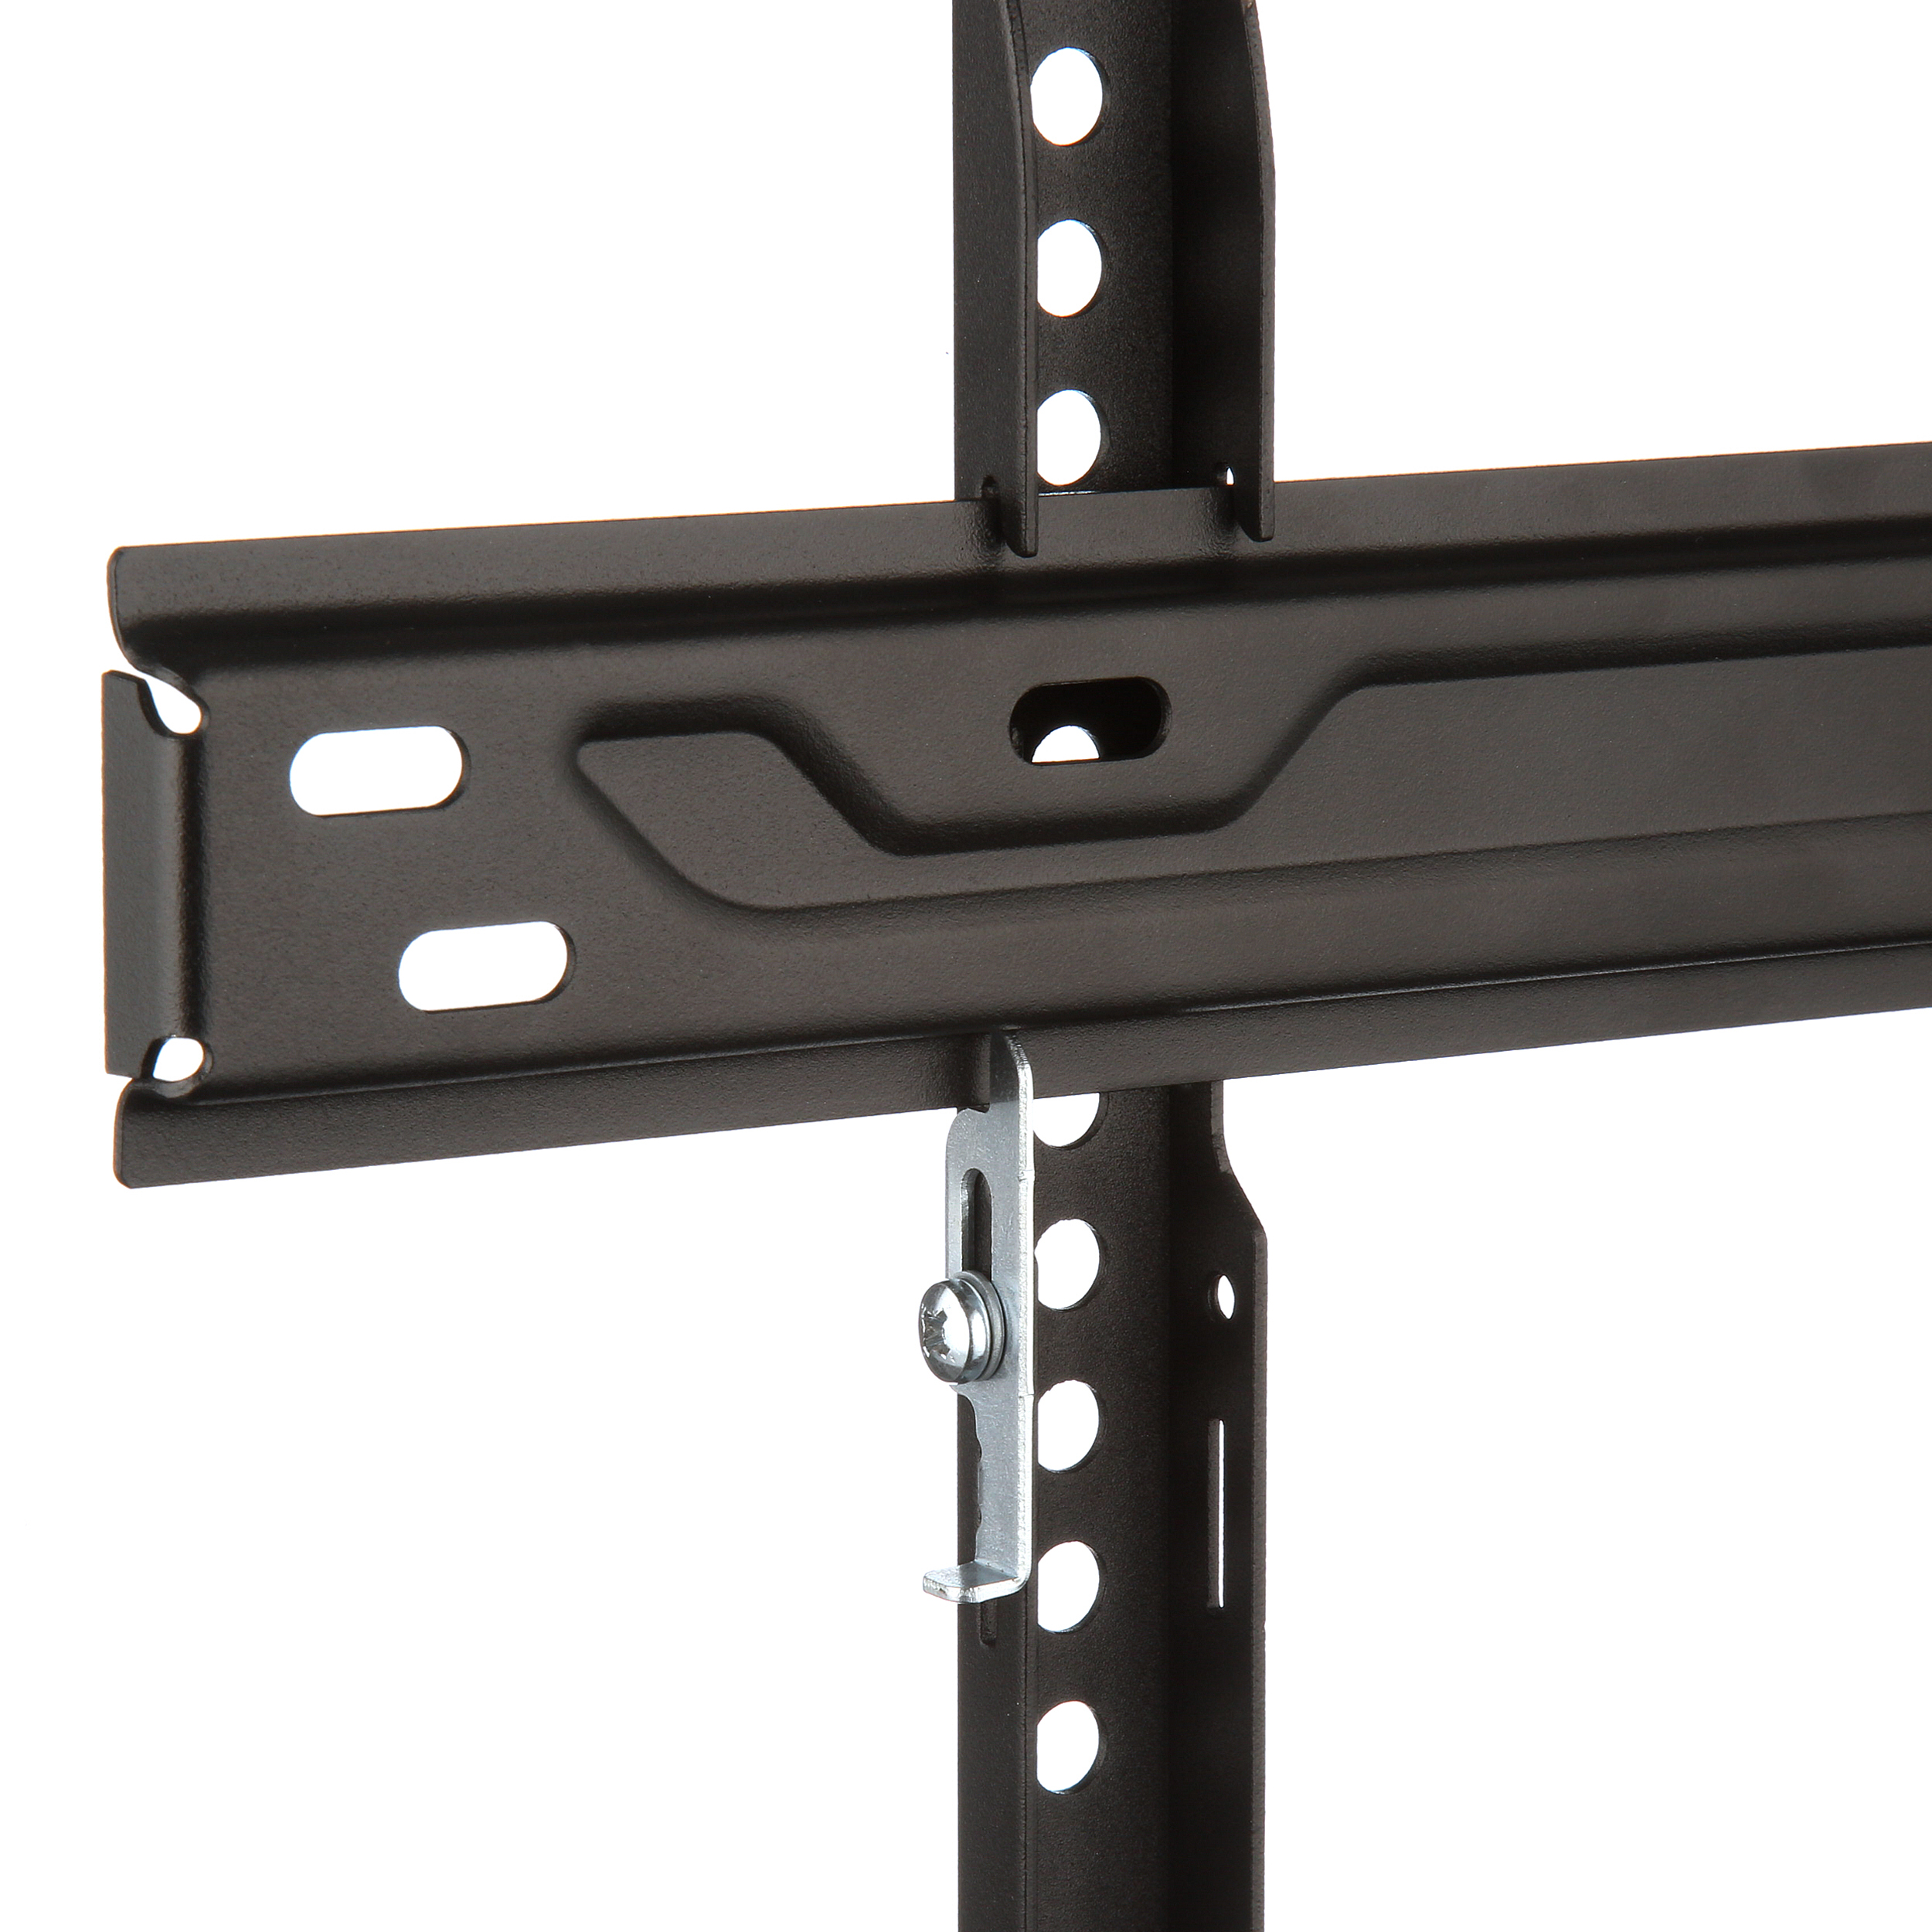 DuraPro Universal Low-Profile Wall Mount for 19" to 60" TVs + Bonus HDMI Cable (DRP650FD) - image 3 of 7